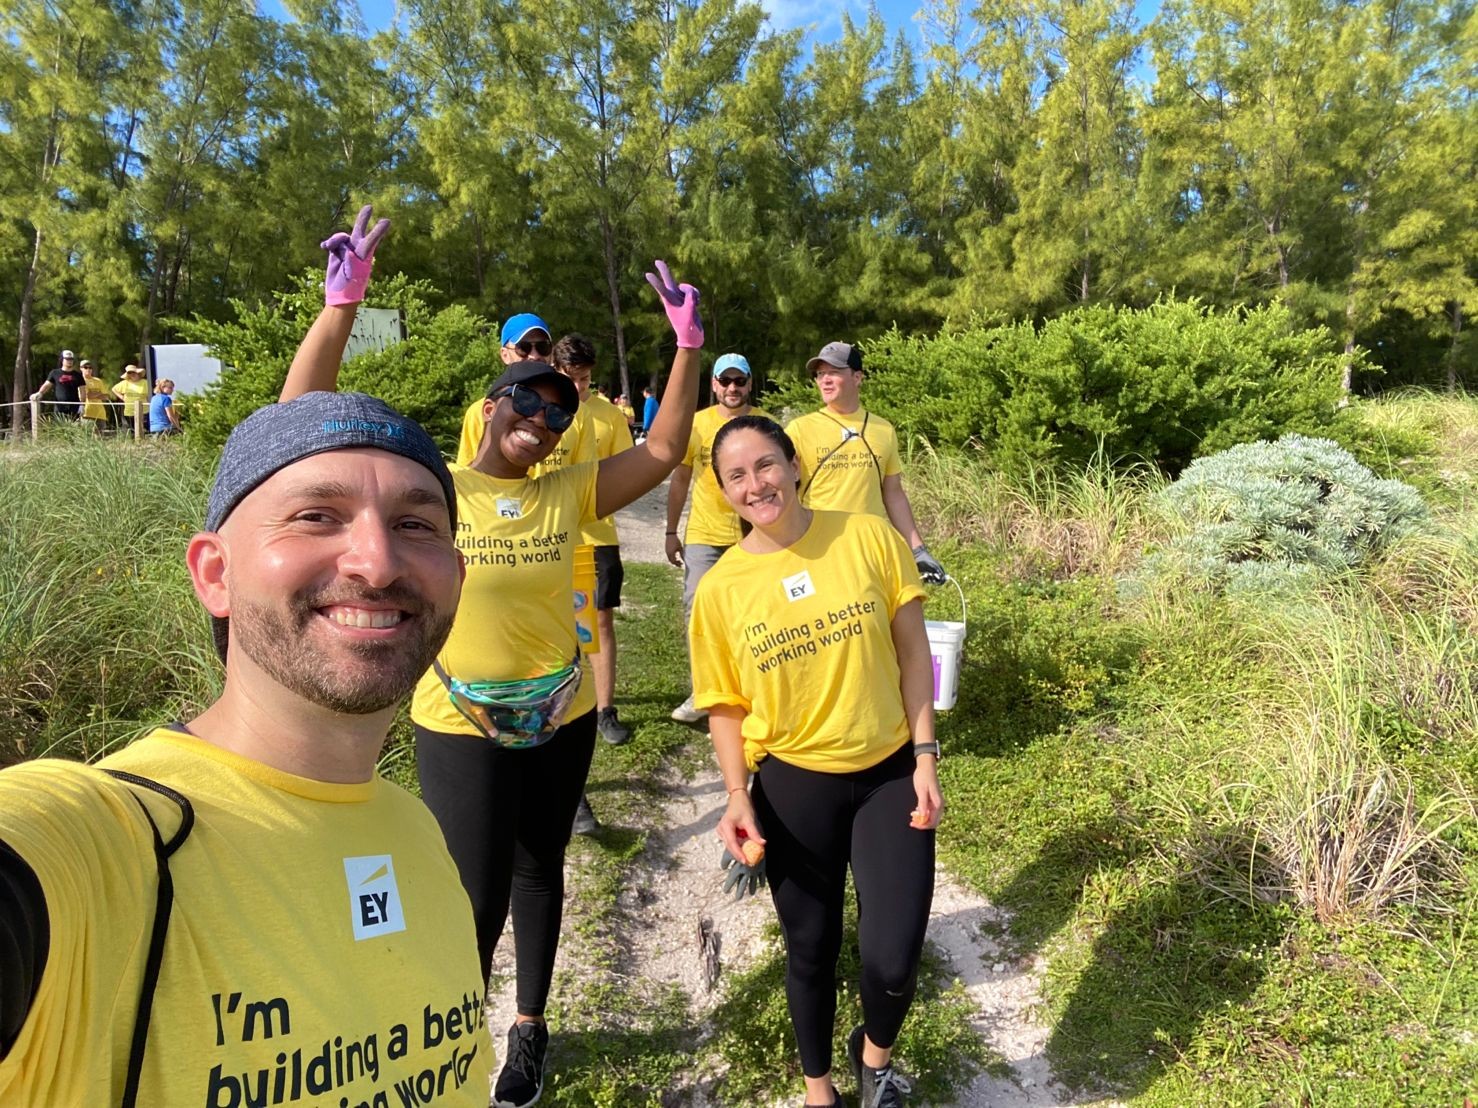 EY Connect Day volunteers are excited to restore a native costal environment in the Historic Virginia Key of Miami.